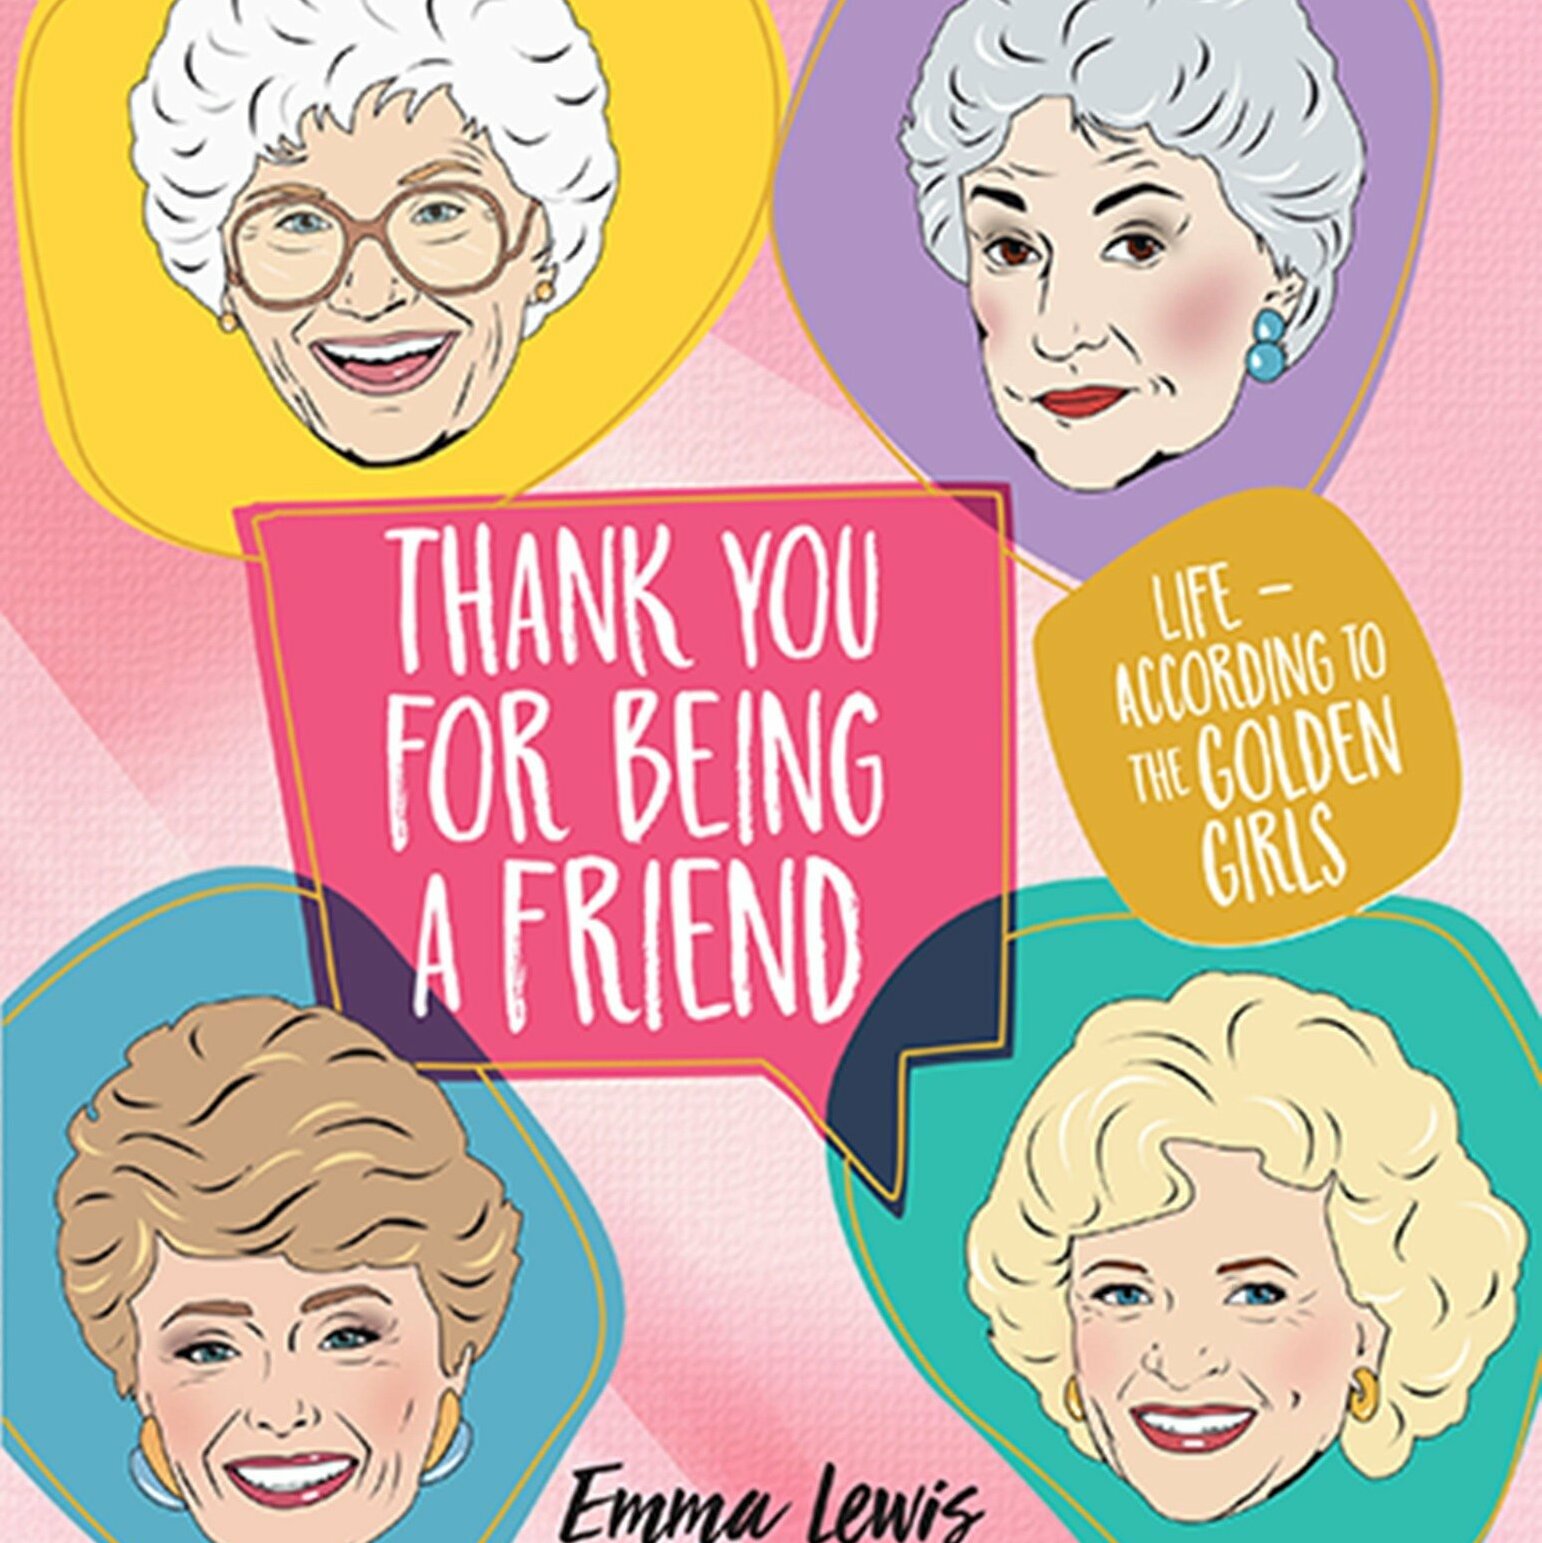 Thank You for Being a Friend: Life According to The Golden Girls